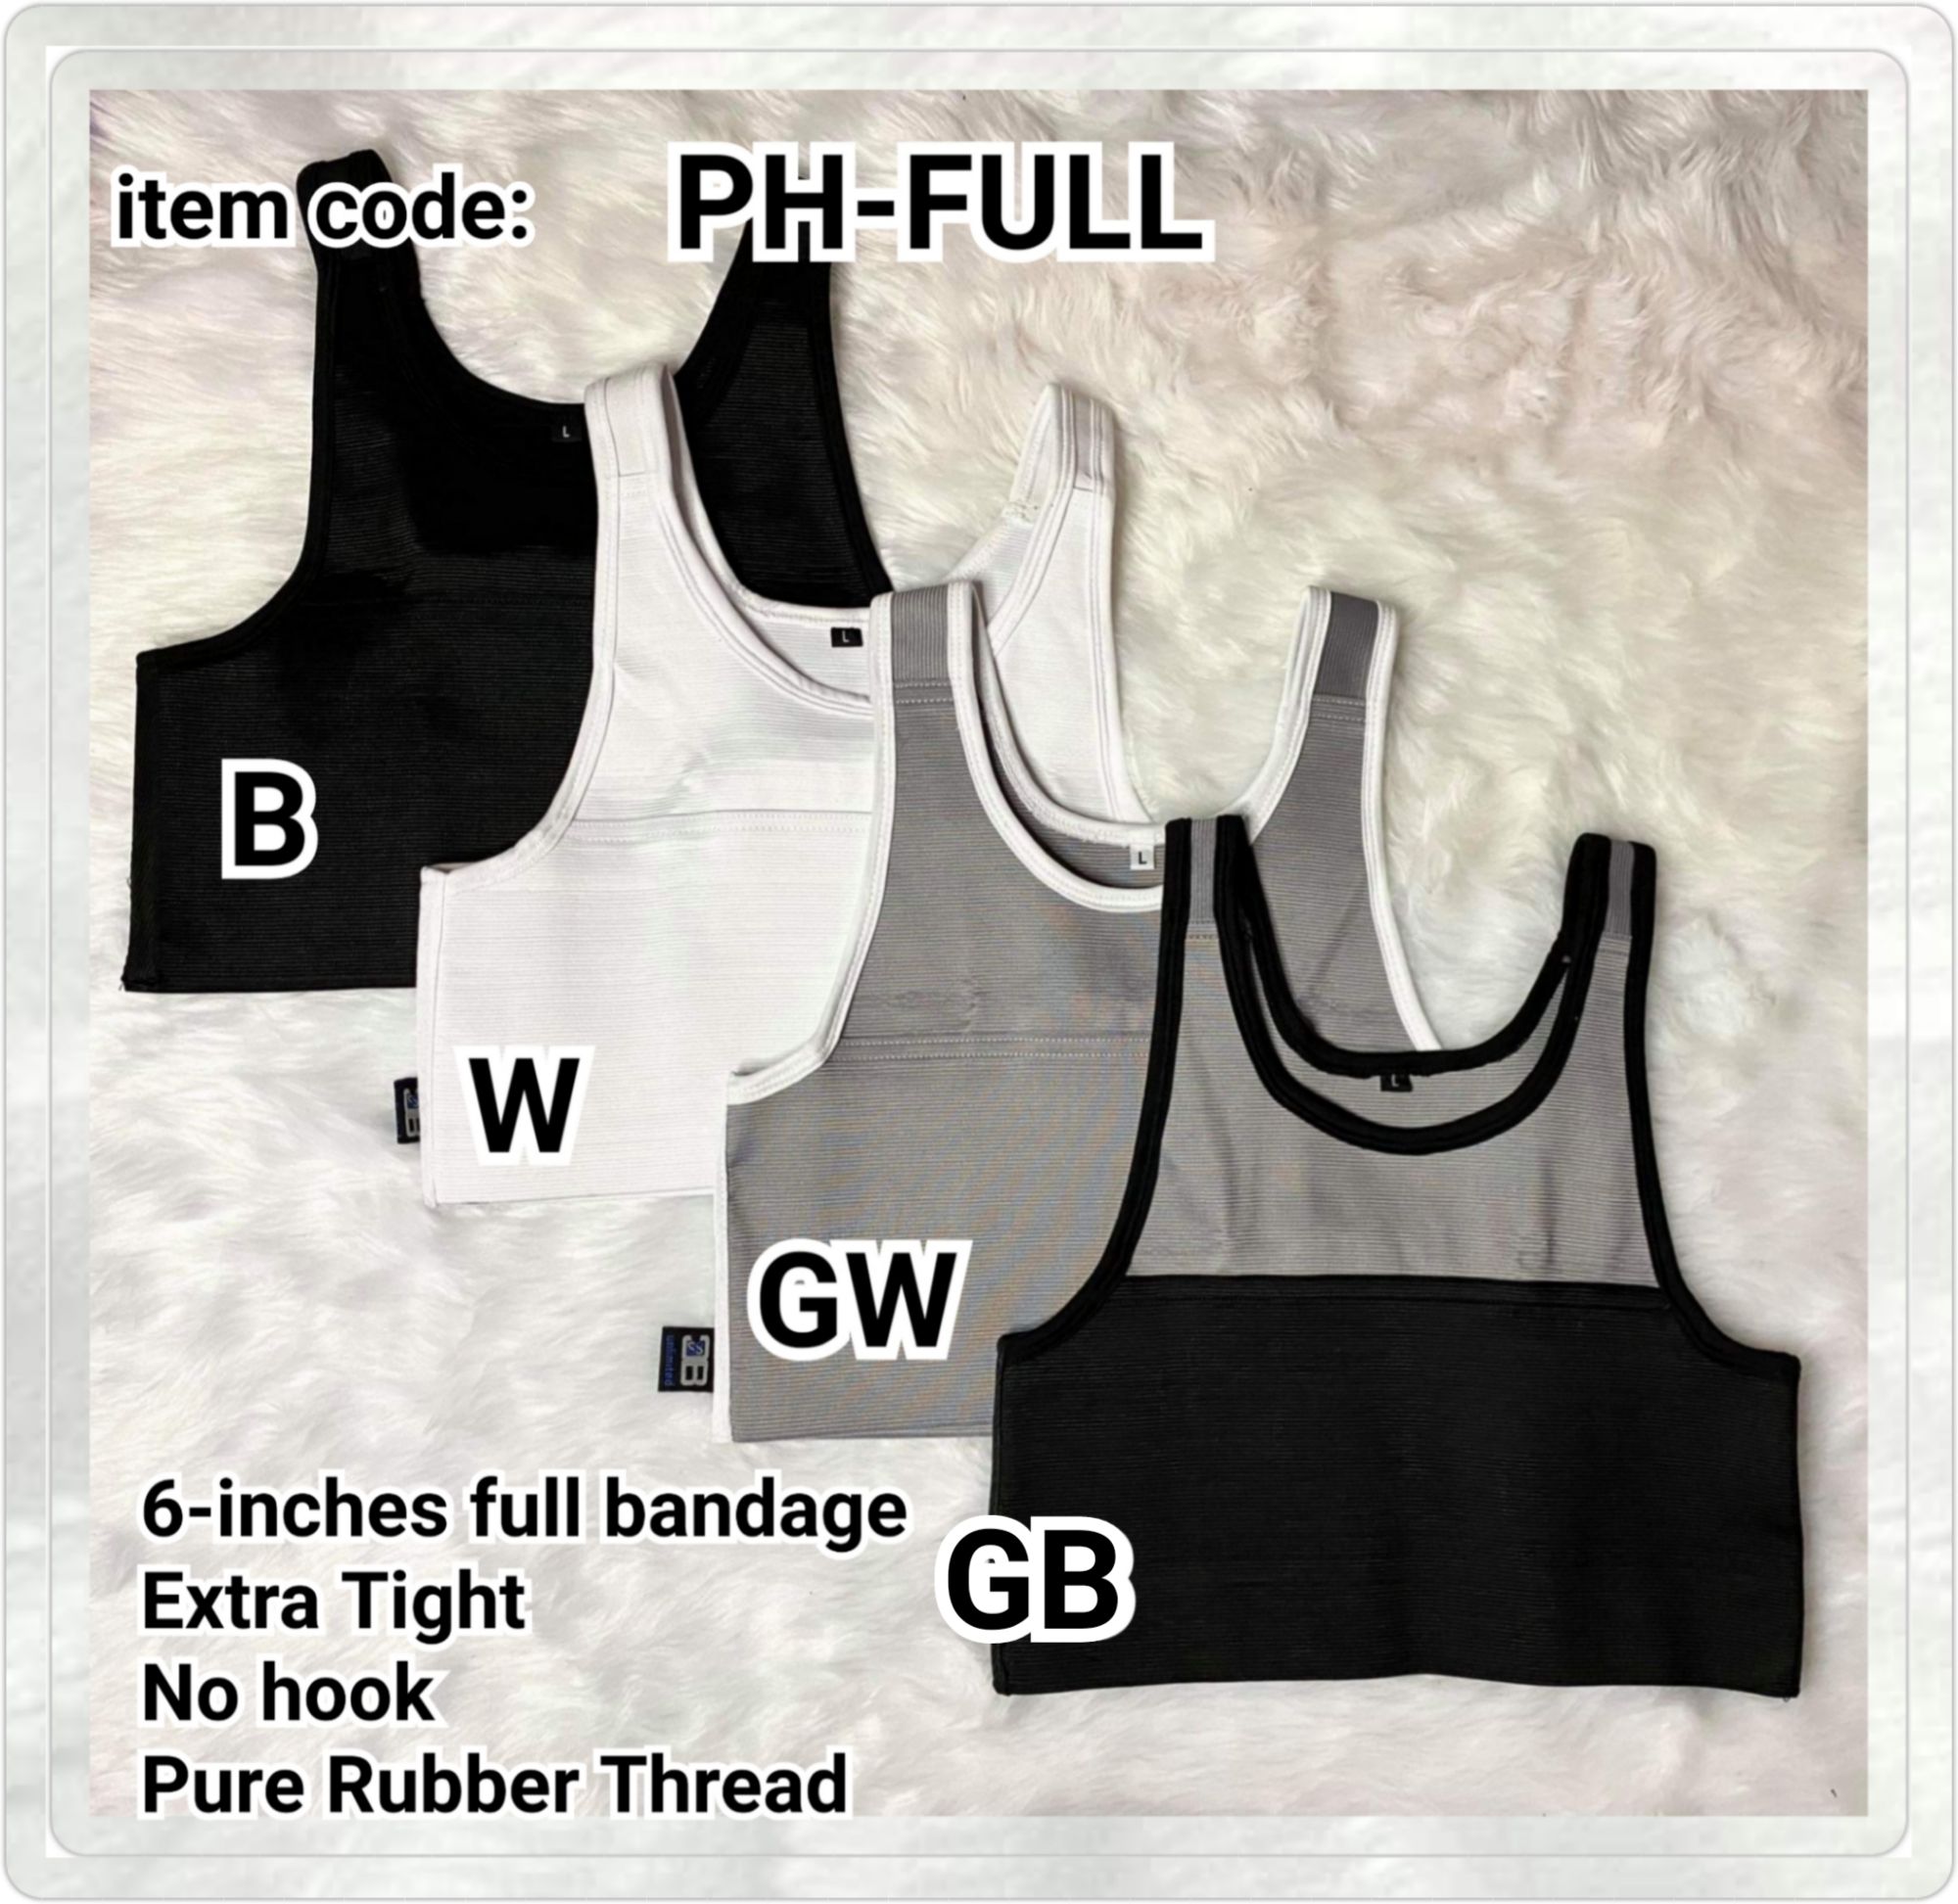 6-Inches Full Bandage Rubber Thread Extra Tight Half Binder